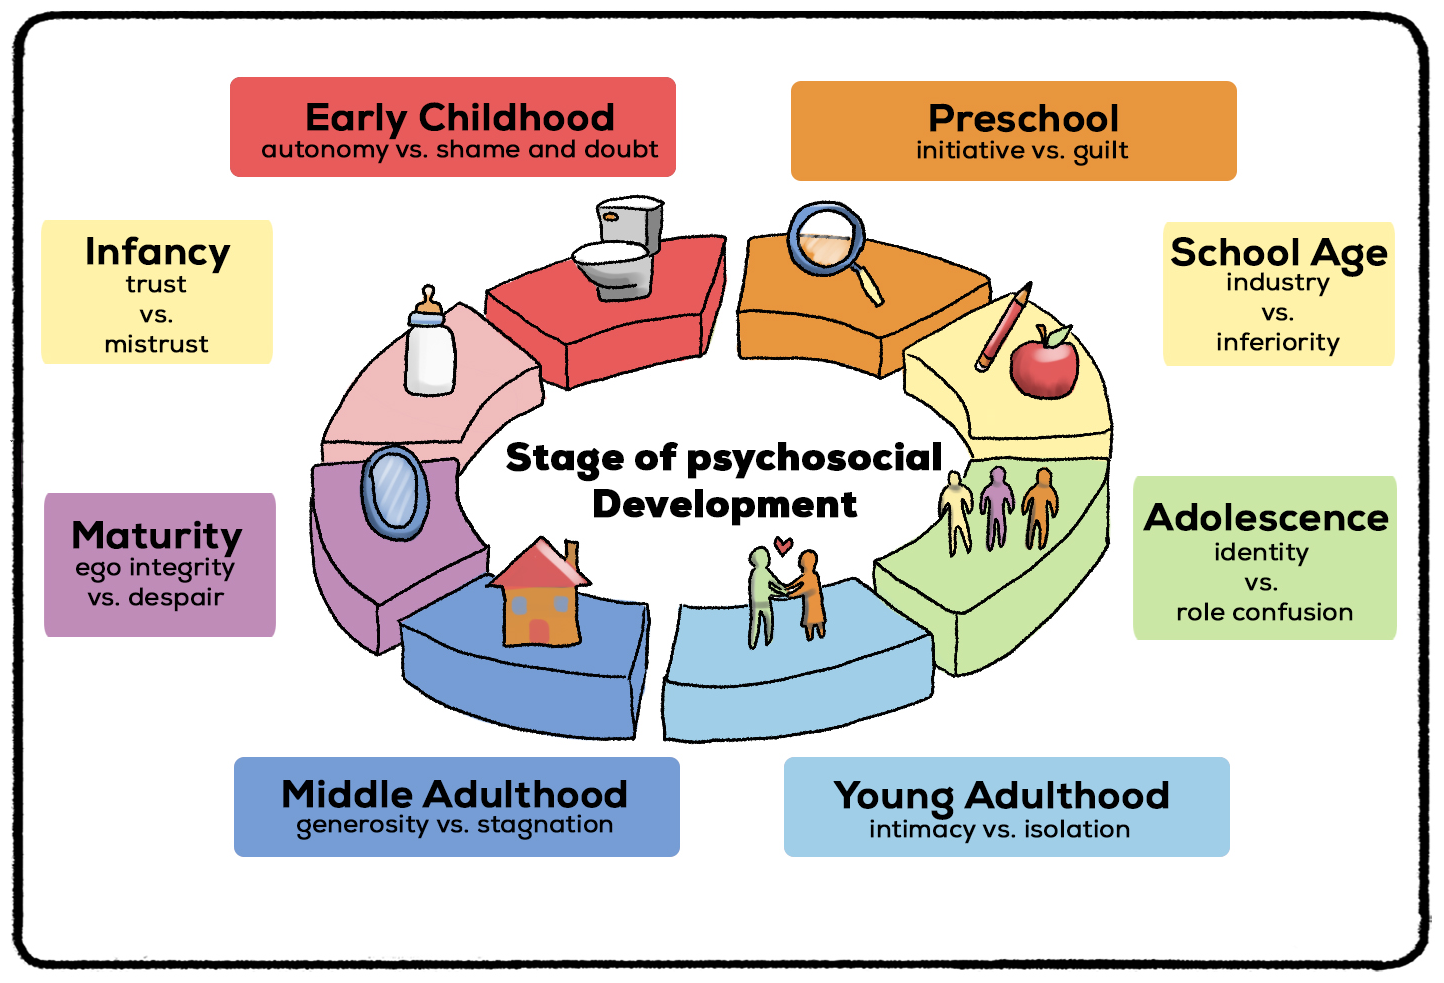 Erikson's Stages of Psychosocial Development